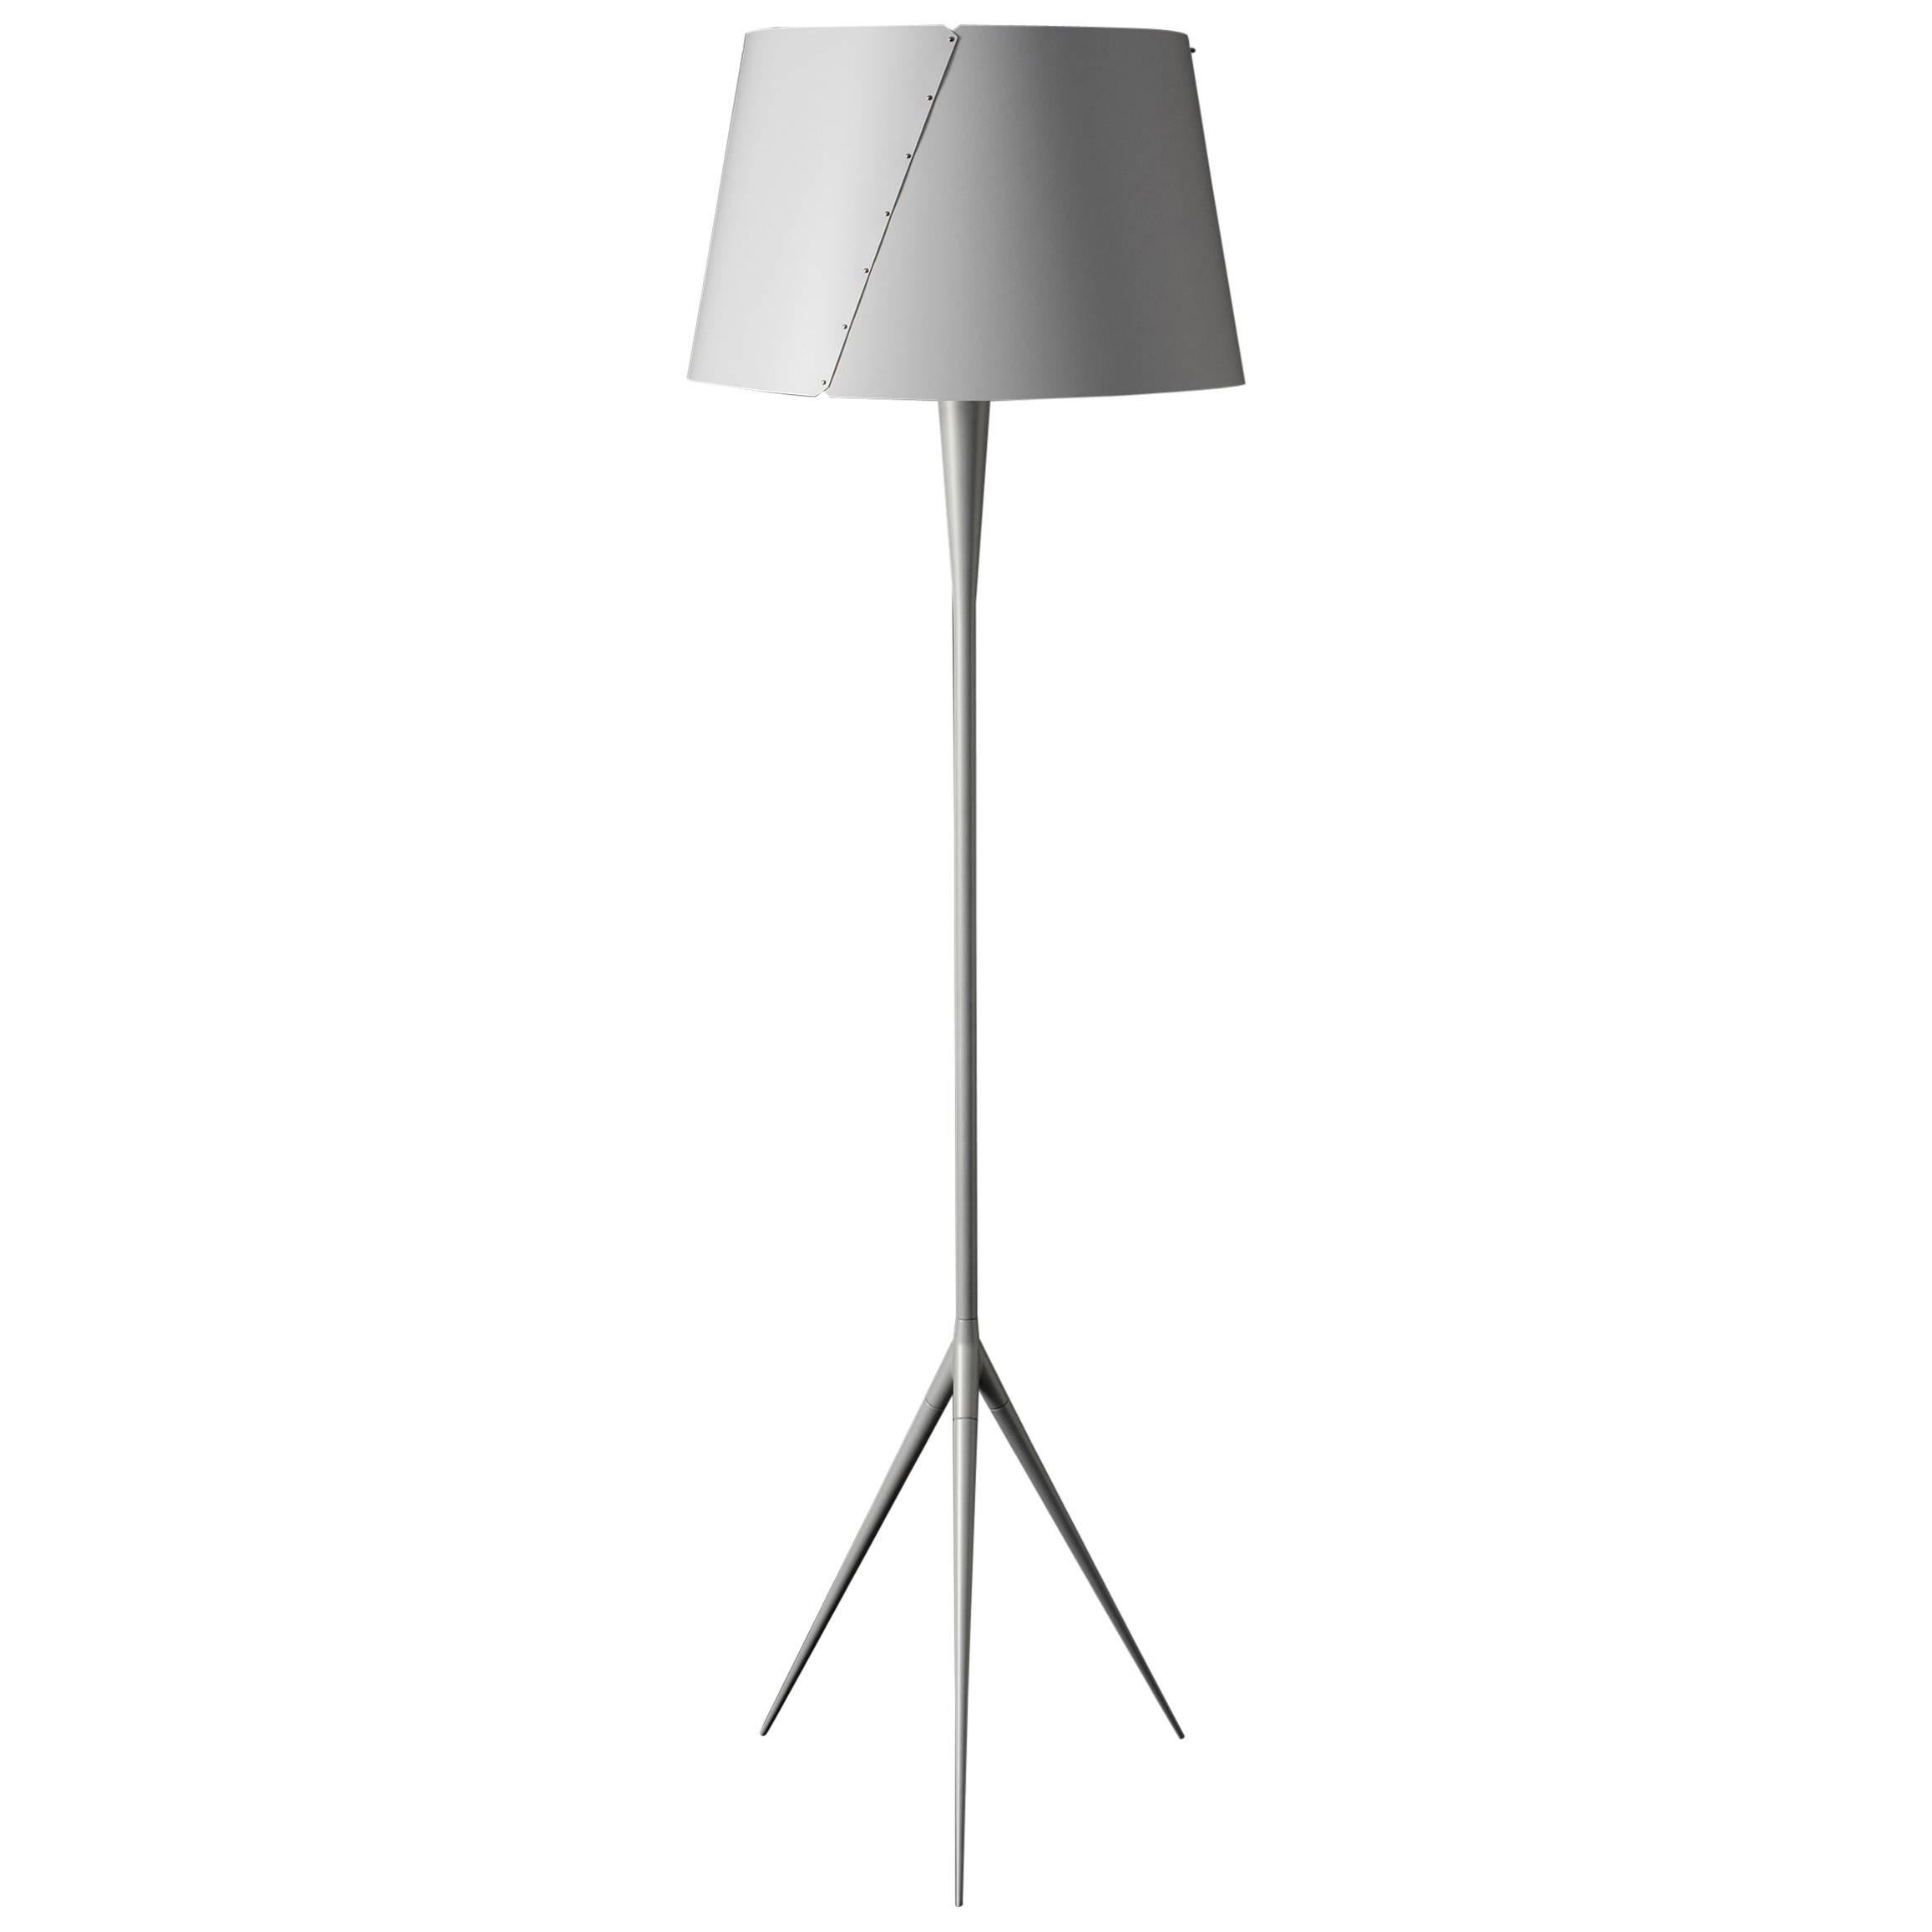 1955 De-Lux A8 by Gio Ponti, Never before Produced Piece For Sale